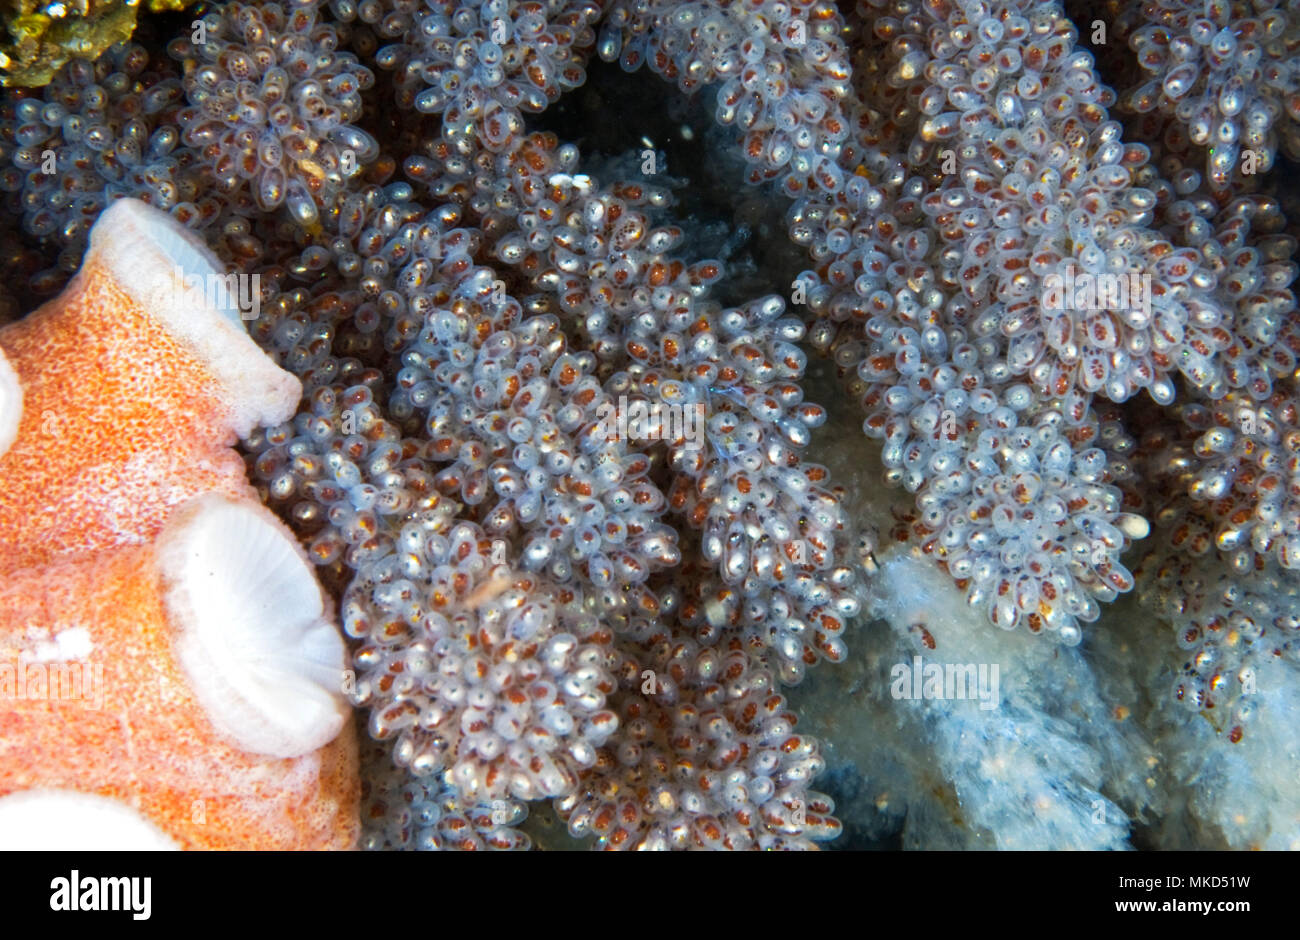 Detail of a putting egg of an octopus. Common Octopus (Octopus vulgaris), Tenerife, Canary Islands Stock Photo